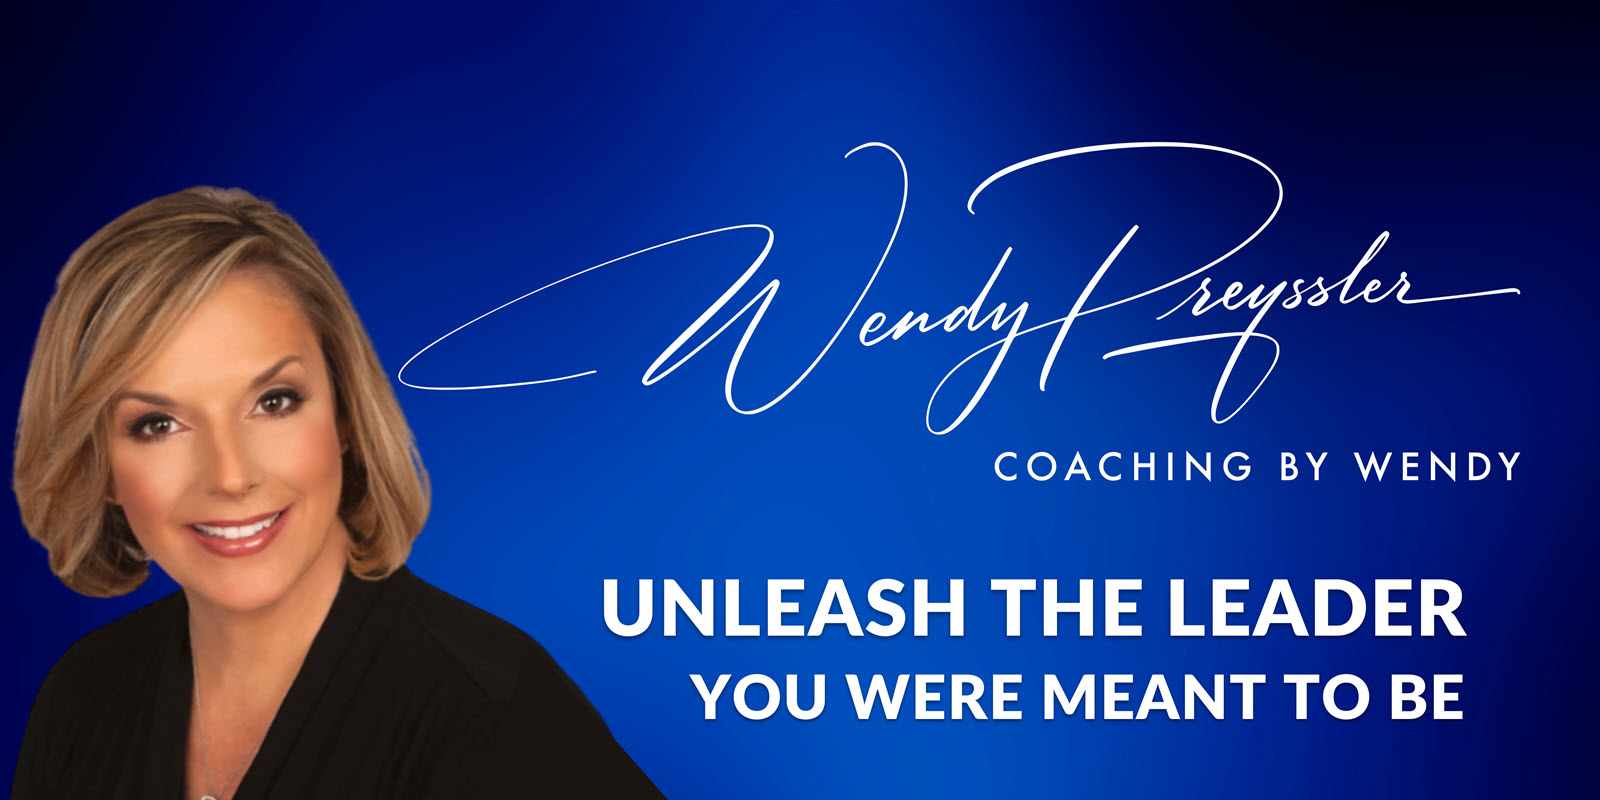 Coaching By Wendy